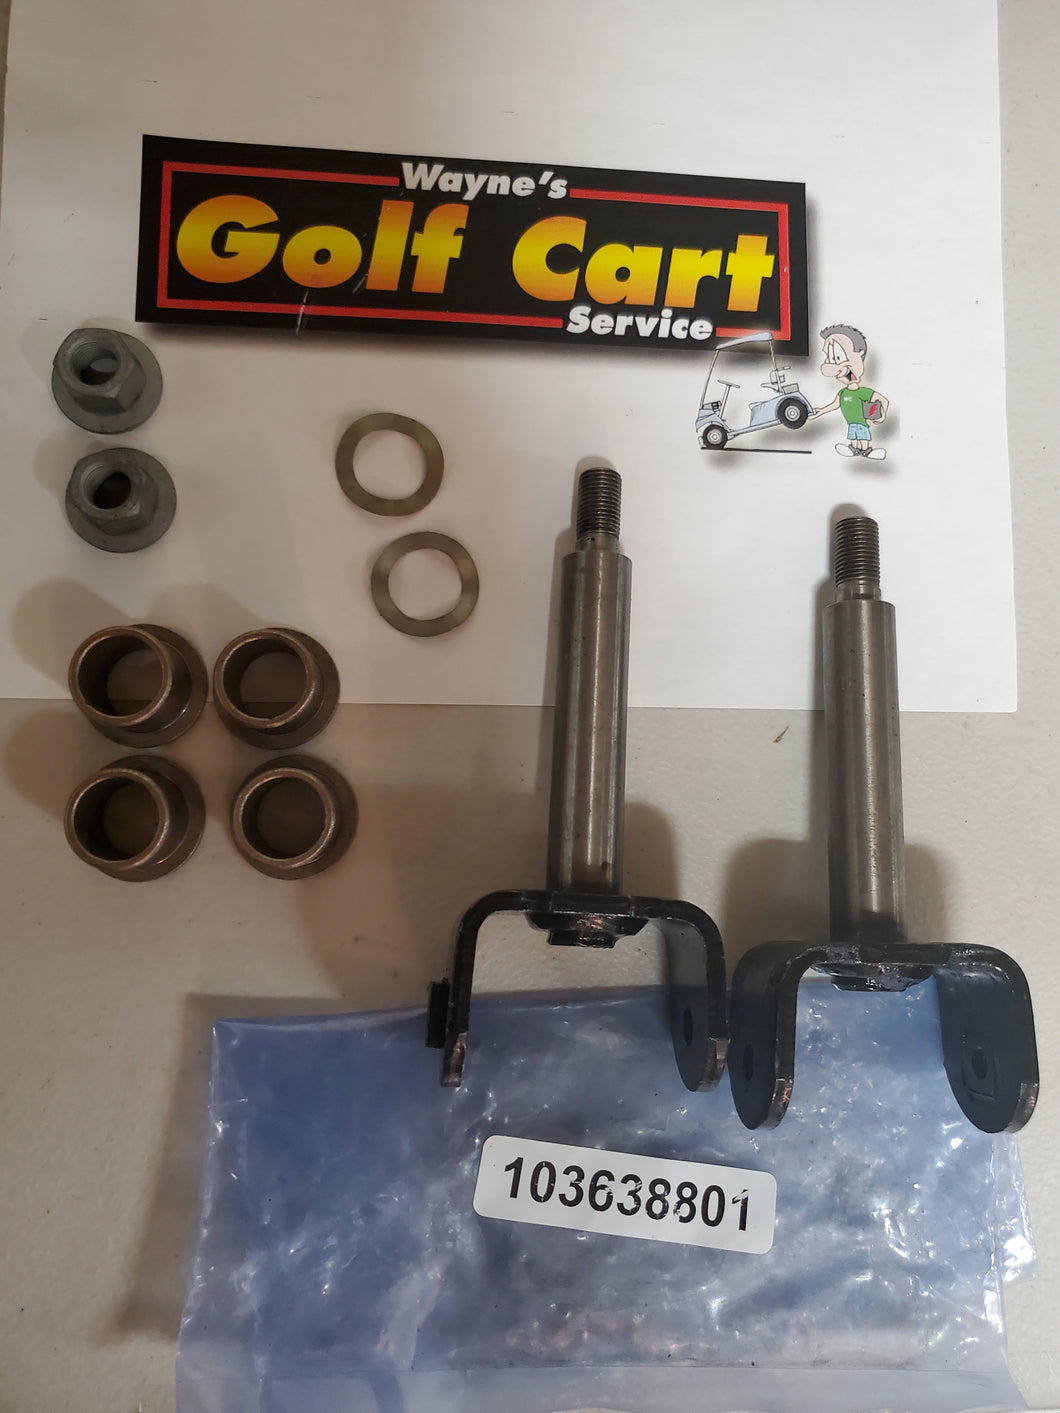 CLUB CAR PRECEDENT KING PIN JOINT KIT for Rebuilding front end of cart